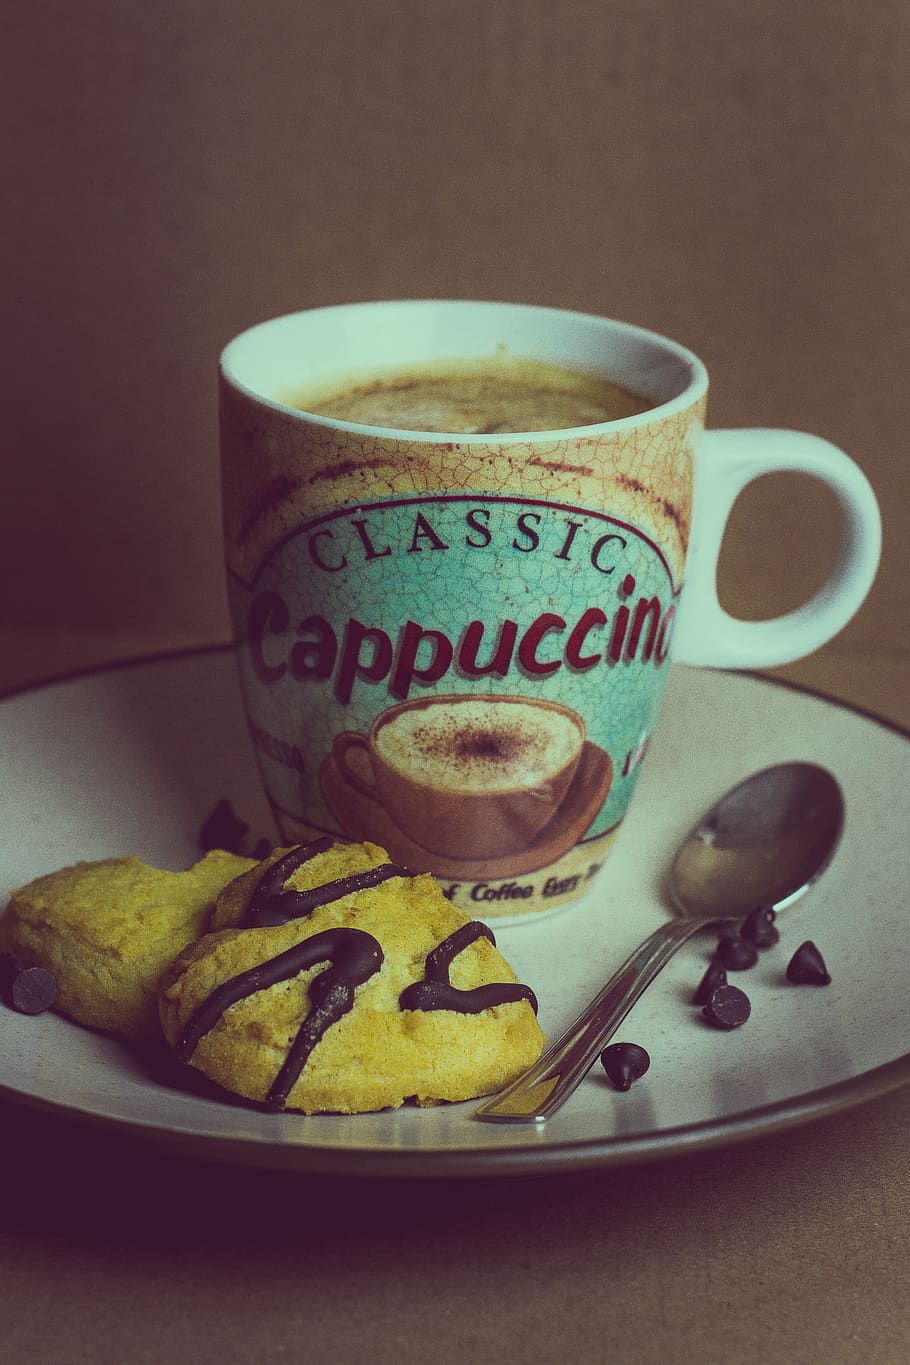 cappuccino, caffe, coffee, chocolate biscuits, biscuits, food and drink, coffee - drink, mug, coffee cup, food